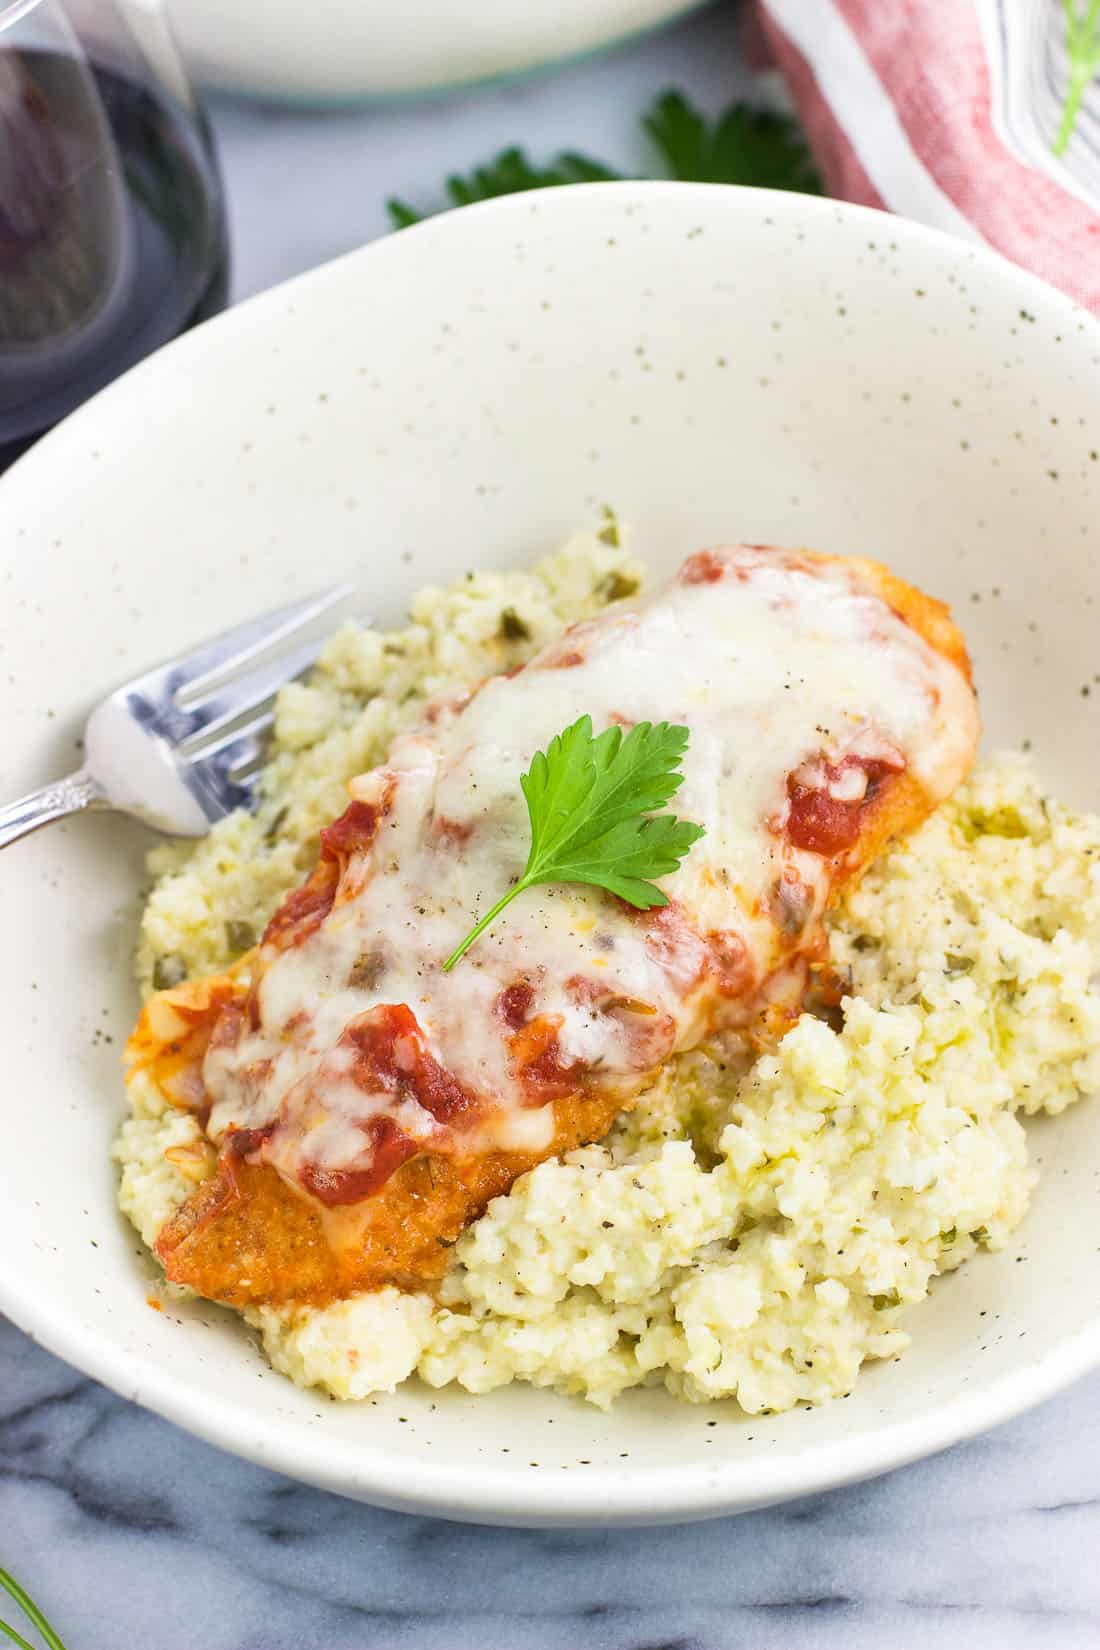 A breaded chicken cutlet covered in marinara sauce and cheese served over grits in a shallow bowl with a fork.